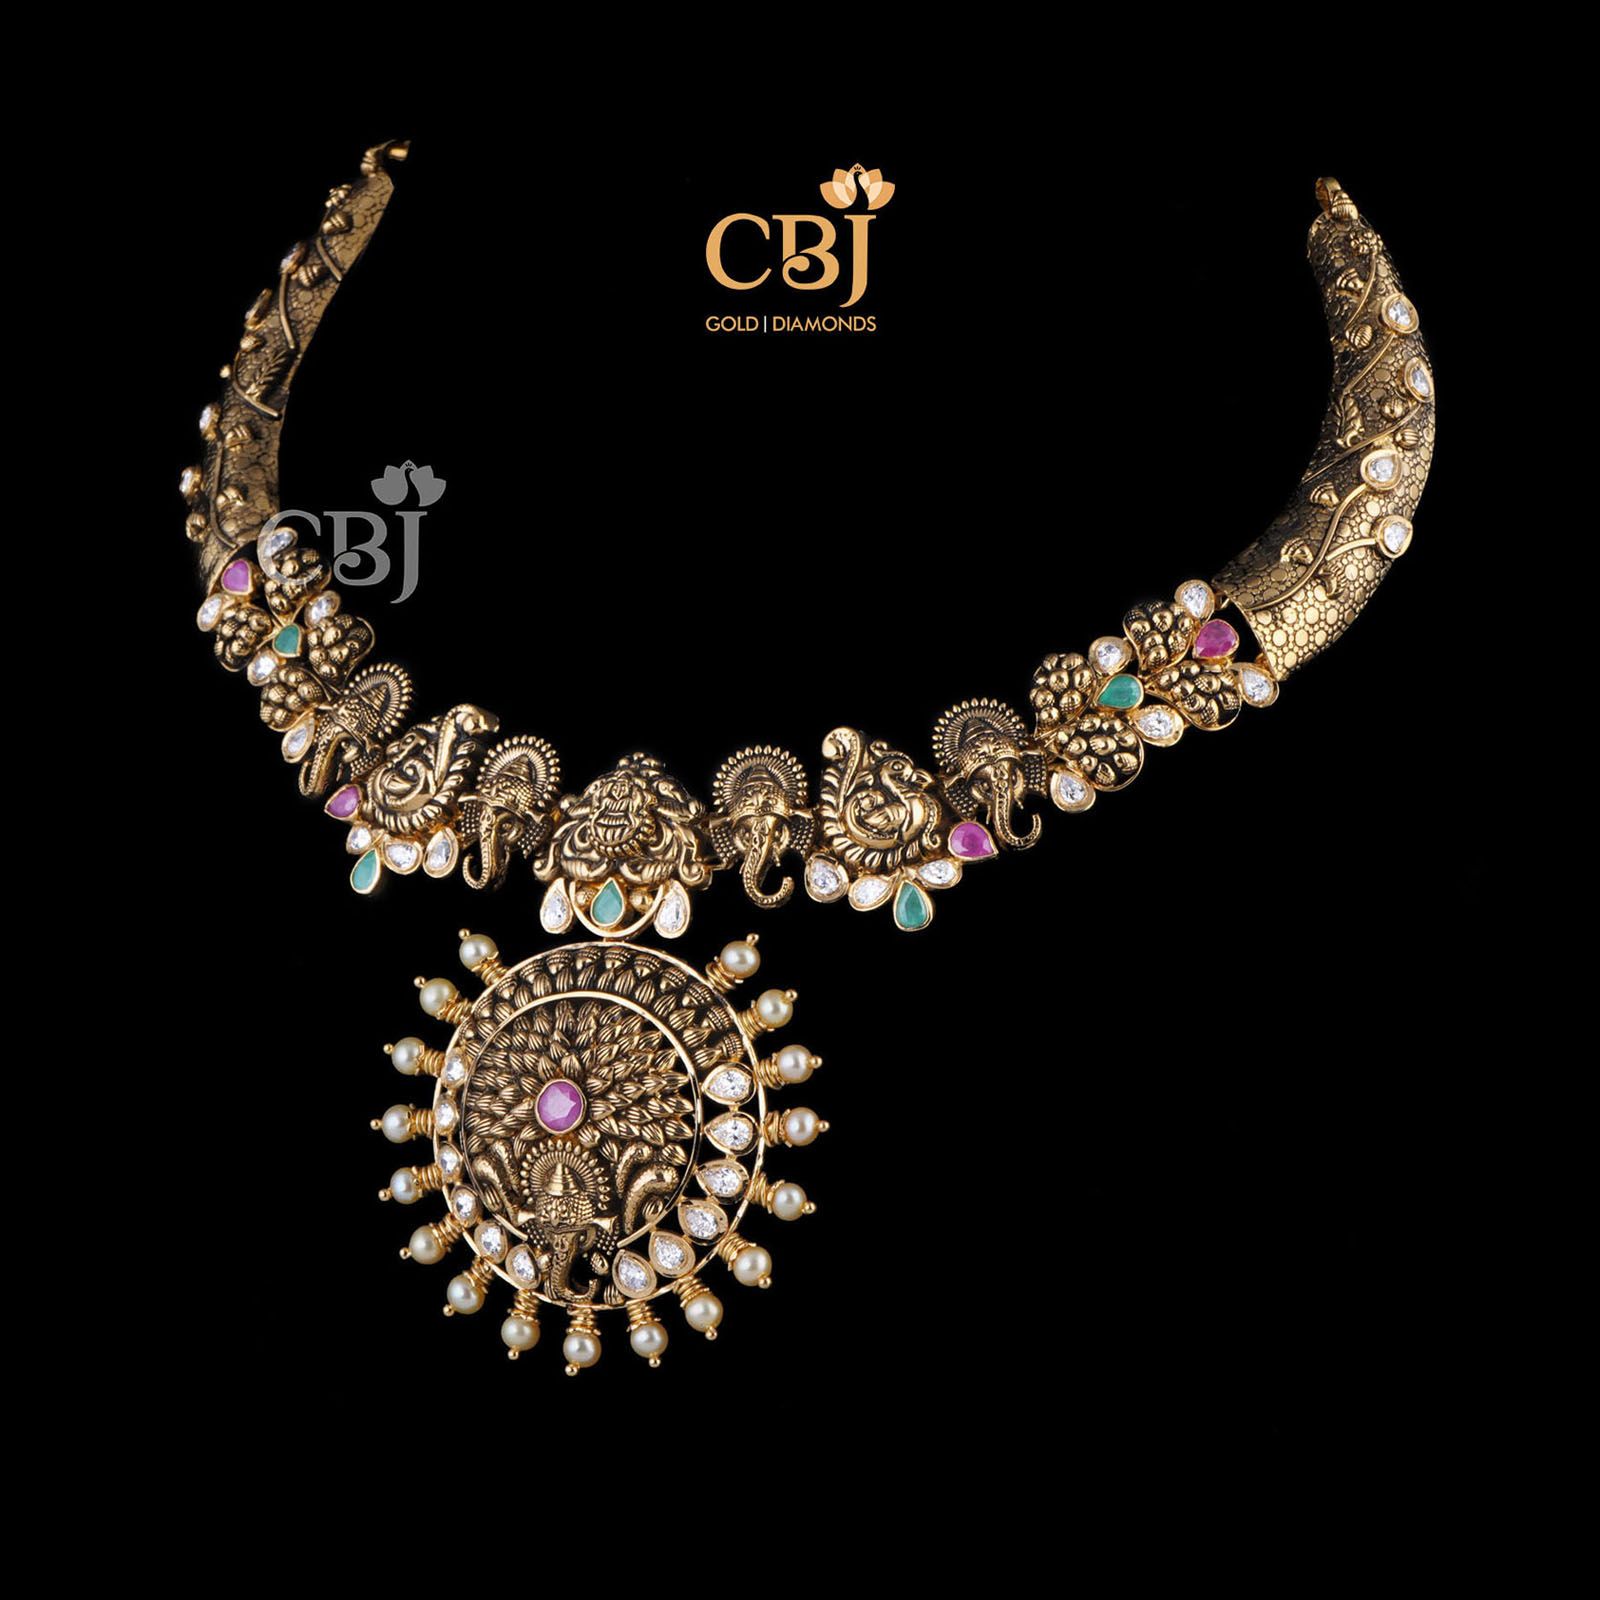 30 Beautiful Gold Kanti Necklace Designs! - Indian Jewellery Designs | Gold necklace  designs, Necklace designs, Antique jewelry indian